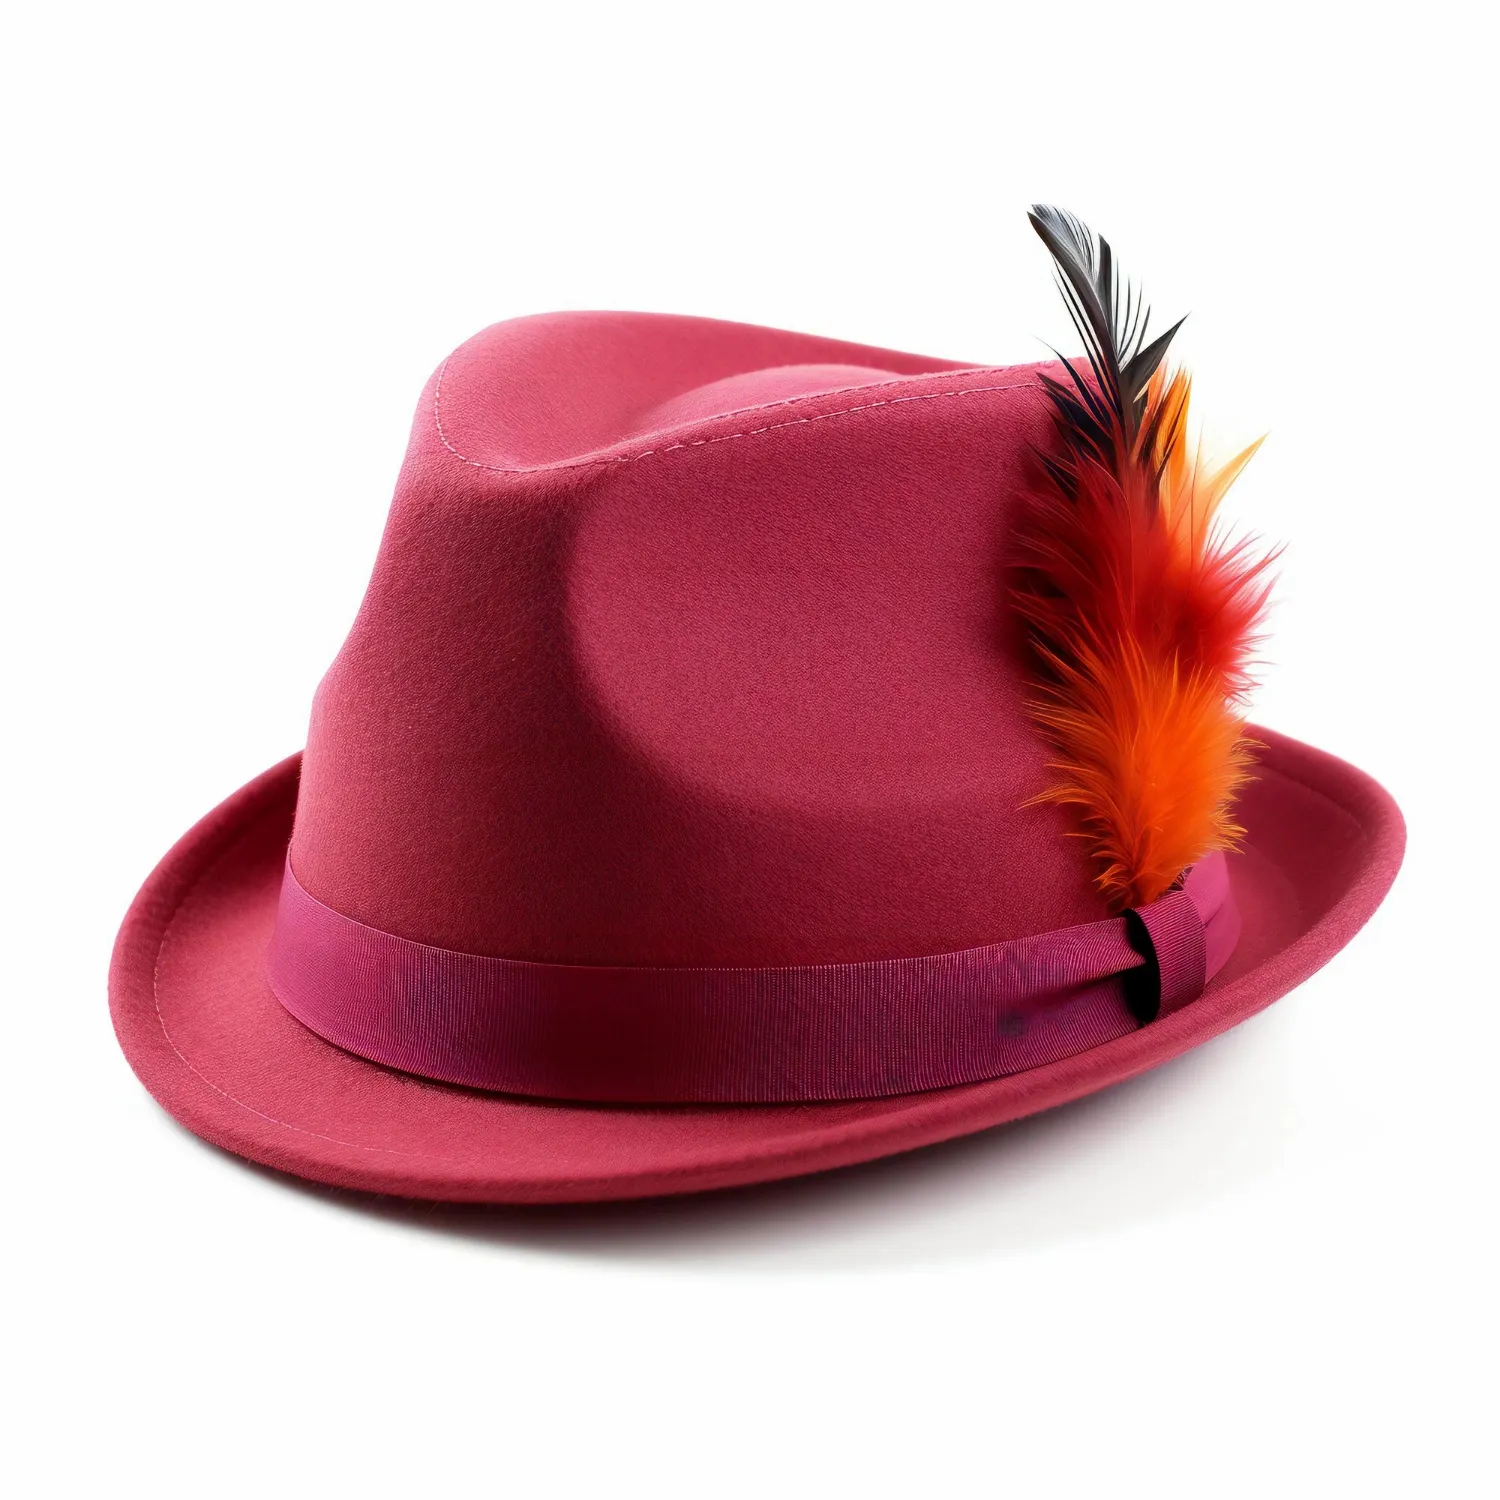 Red hat with feather isolated on white background